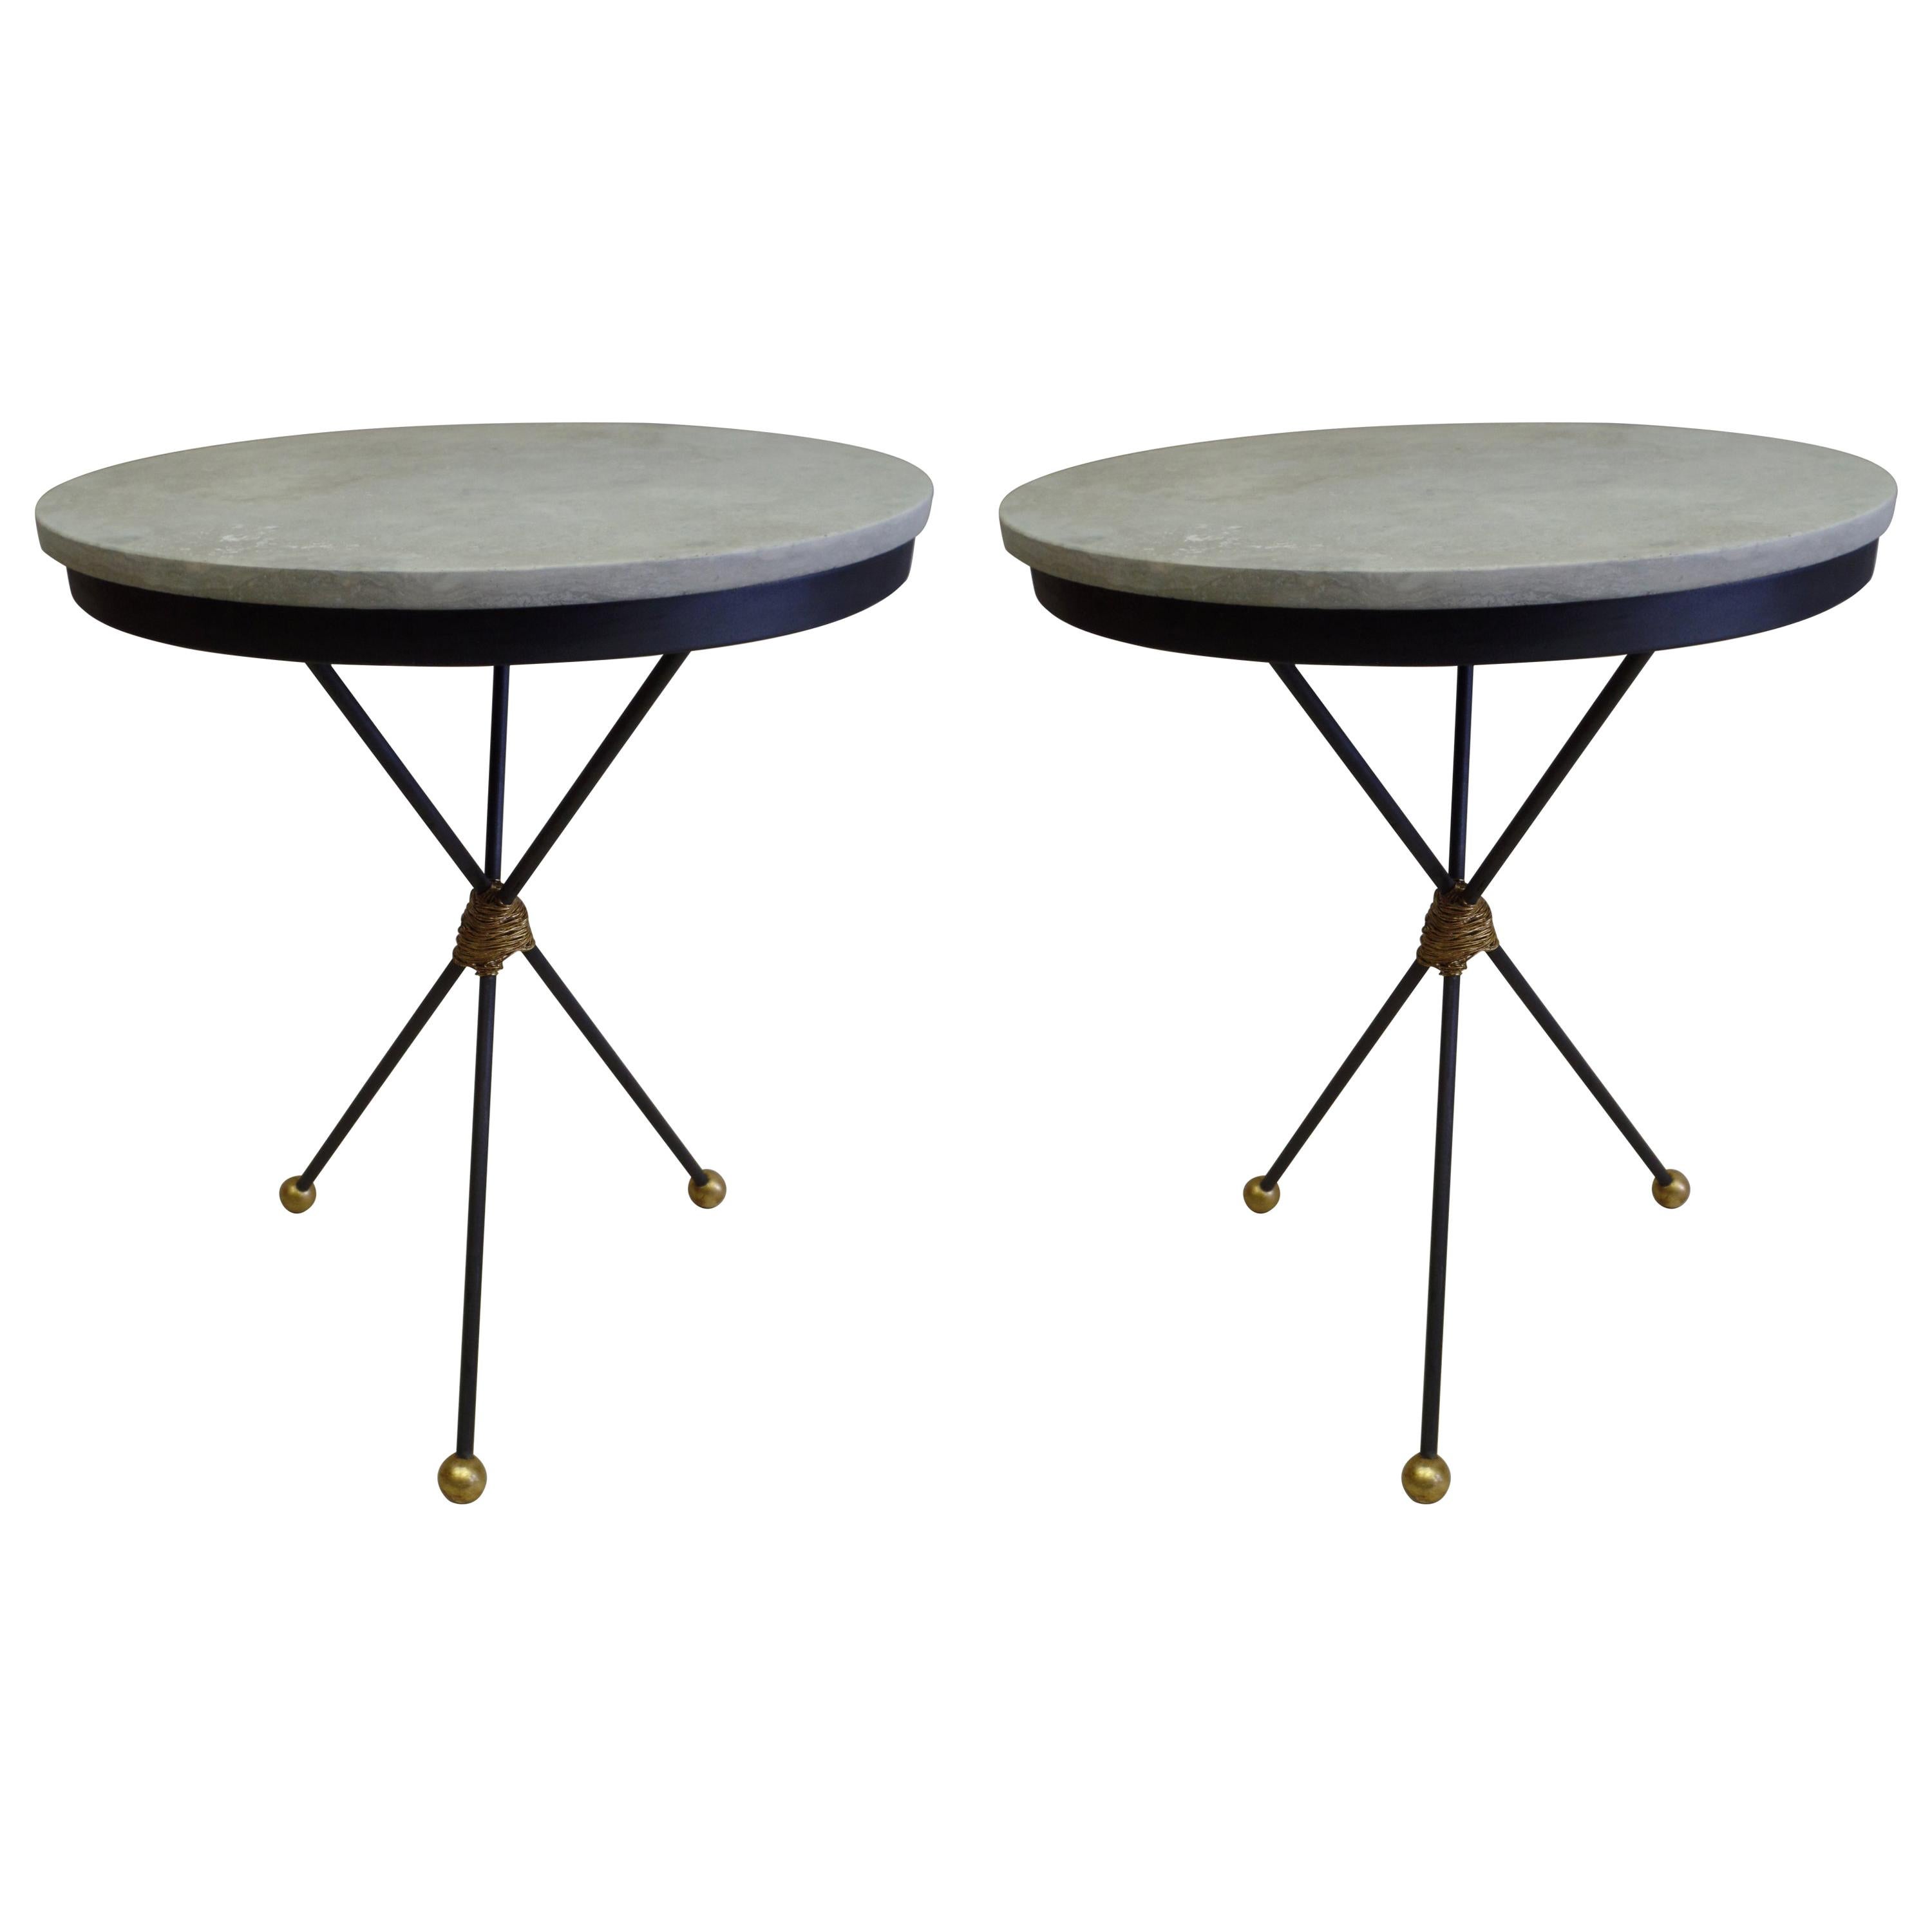 Custom Pair of French Modern Neoclassical Gilt Iron Side Tables, Poillerat